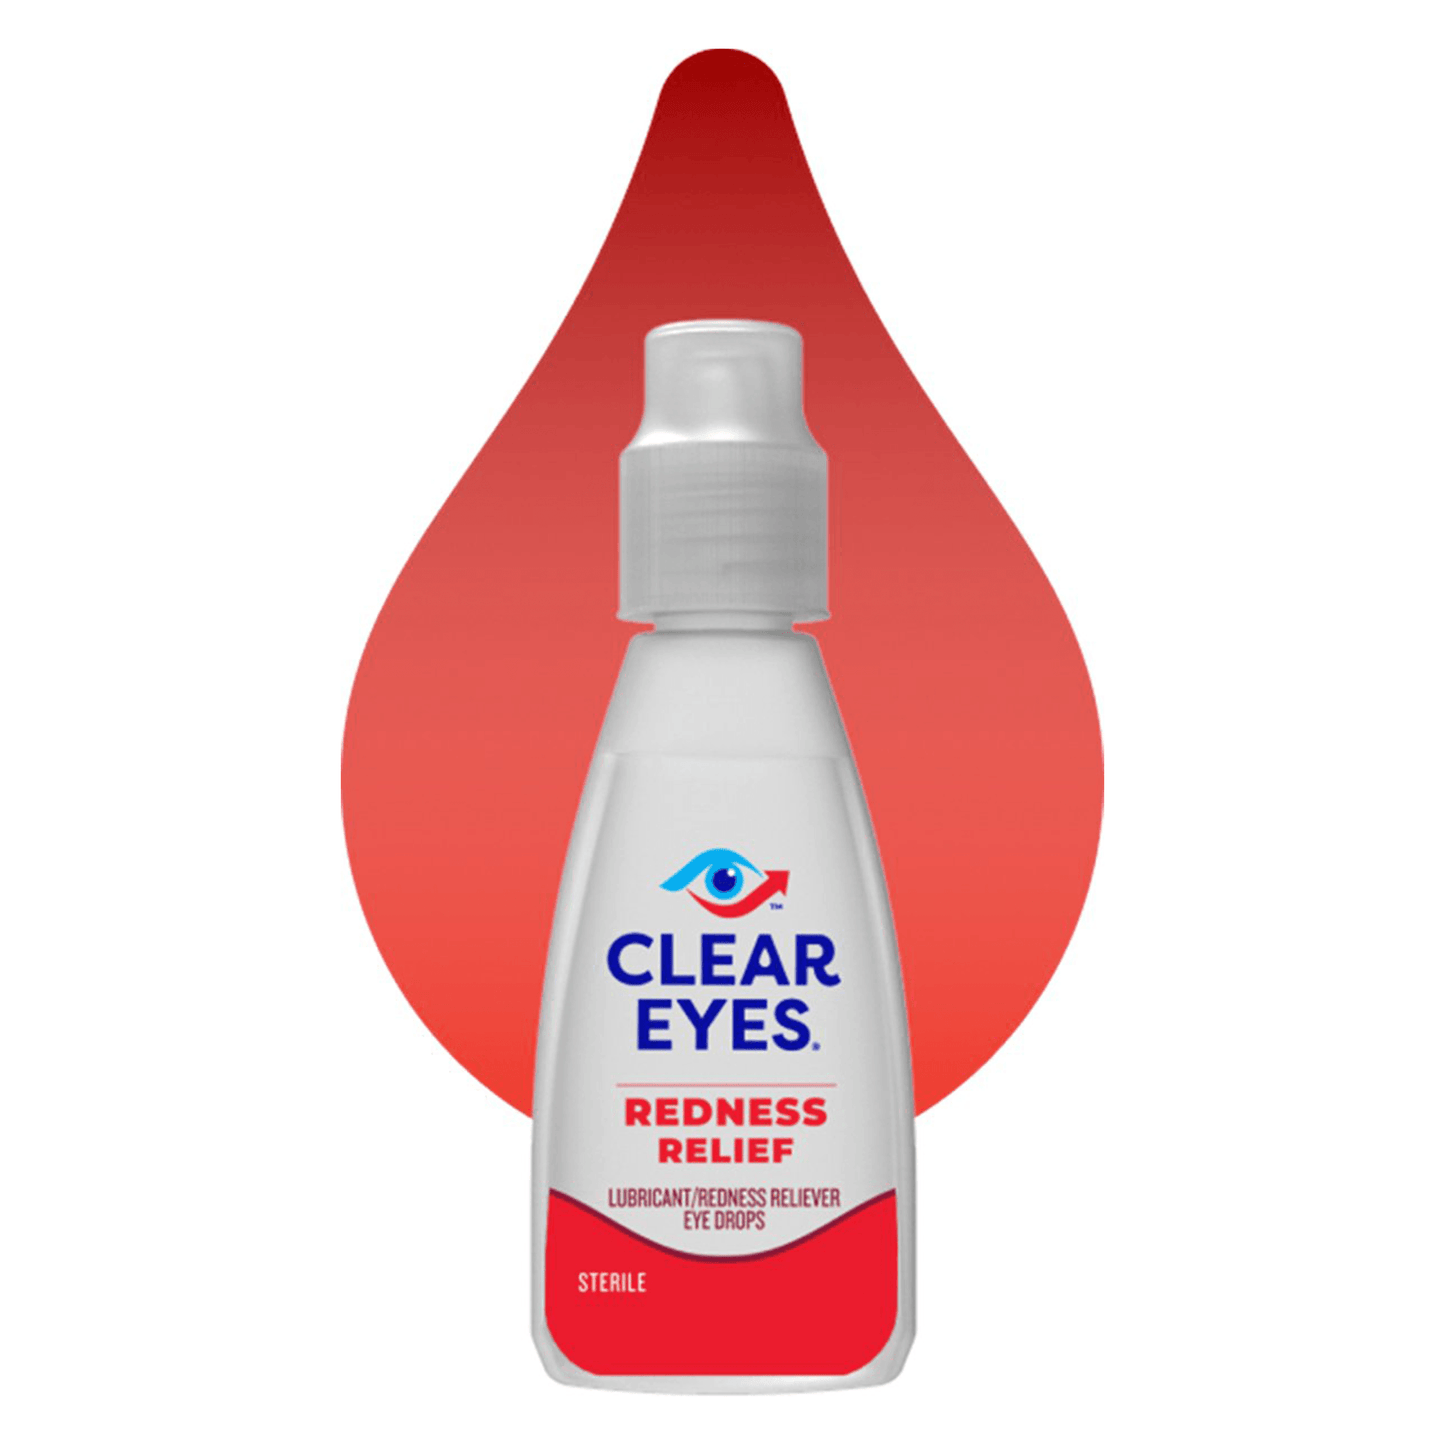 Clear Eyes ®️ Redness Relief XL eye drops for red eyes